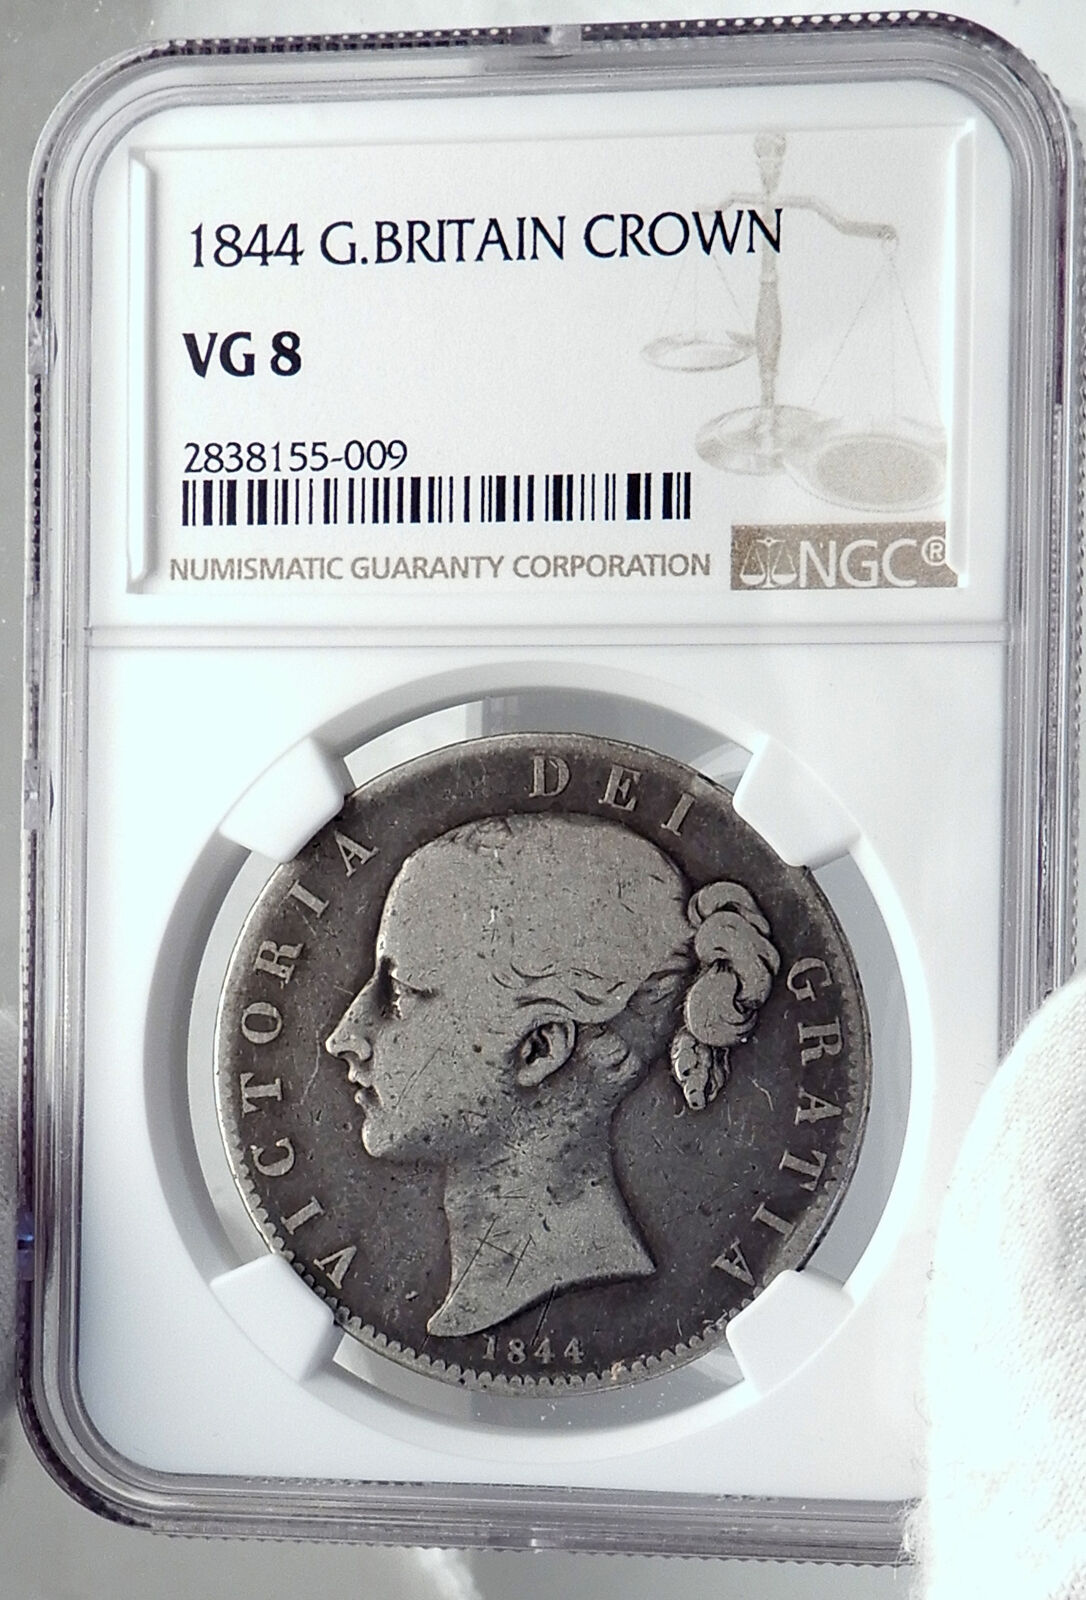 1844 Great Britain UK QUEEN VICTORIA Antique Silver LARGE Crown Coin NGC i81748